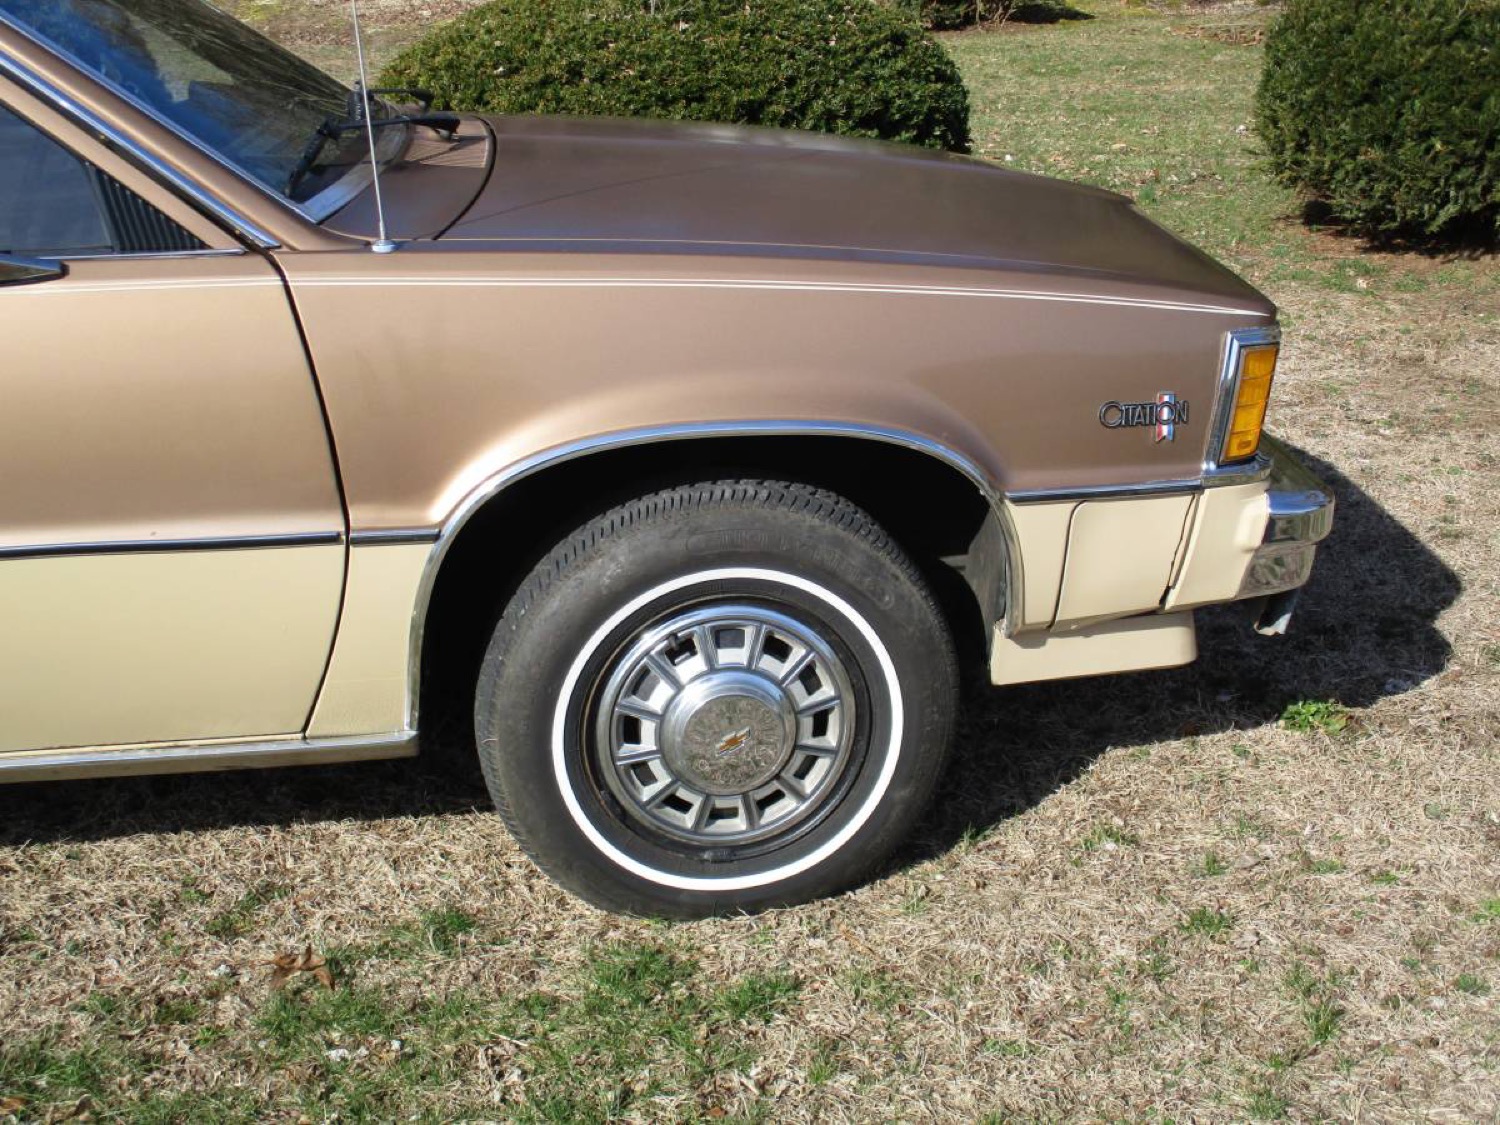 Clean 1981 Chevy Citation Coupe Up For Sale